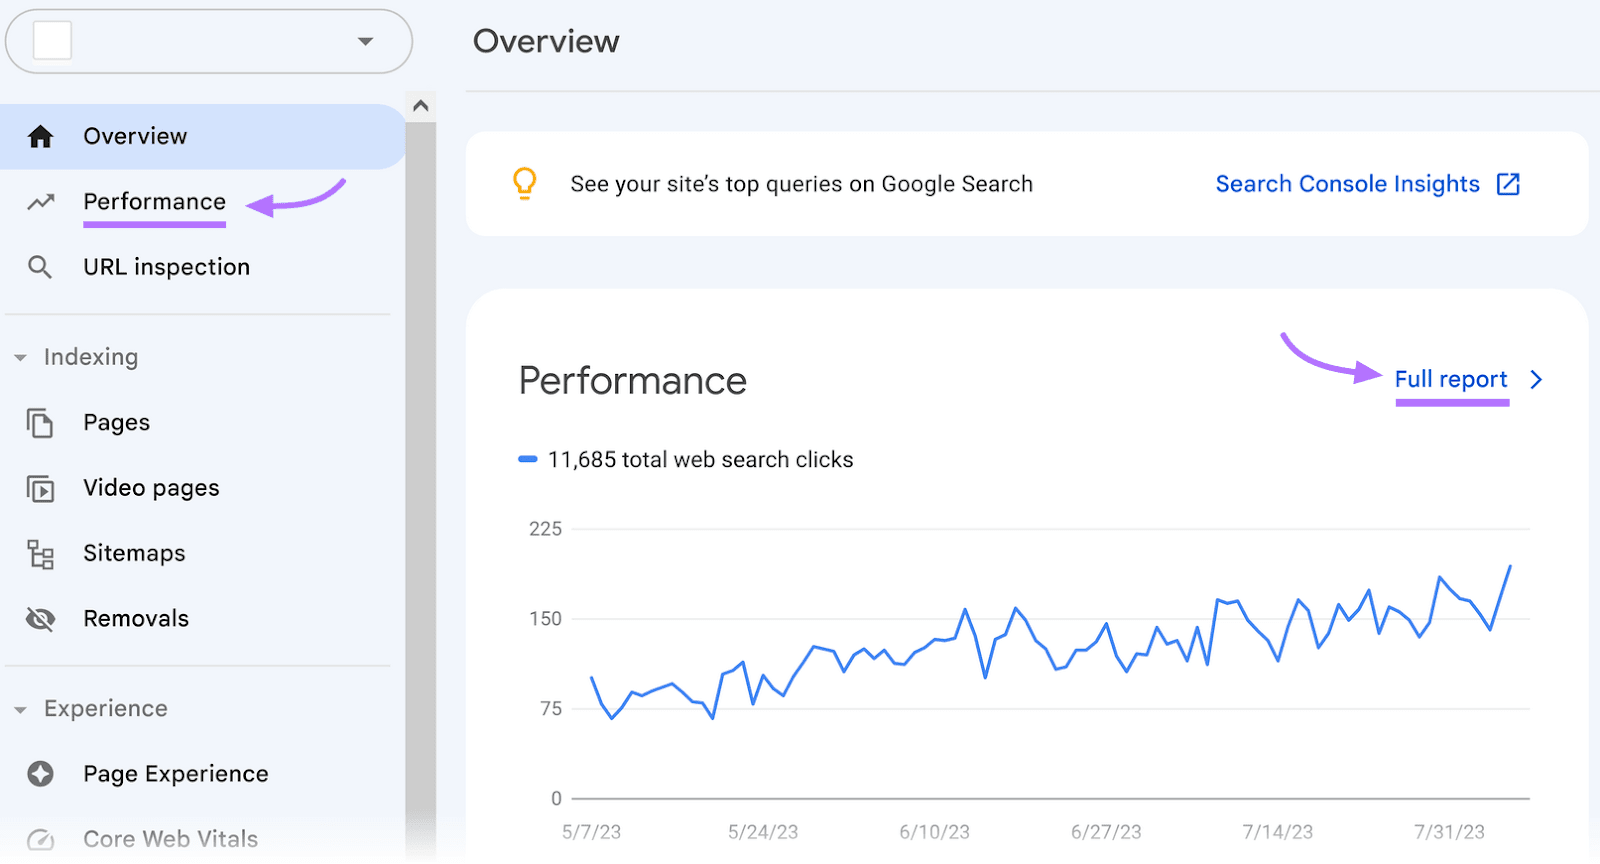 “Performance” and "Full report" ،ons highlighted in Google Search Console